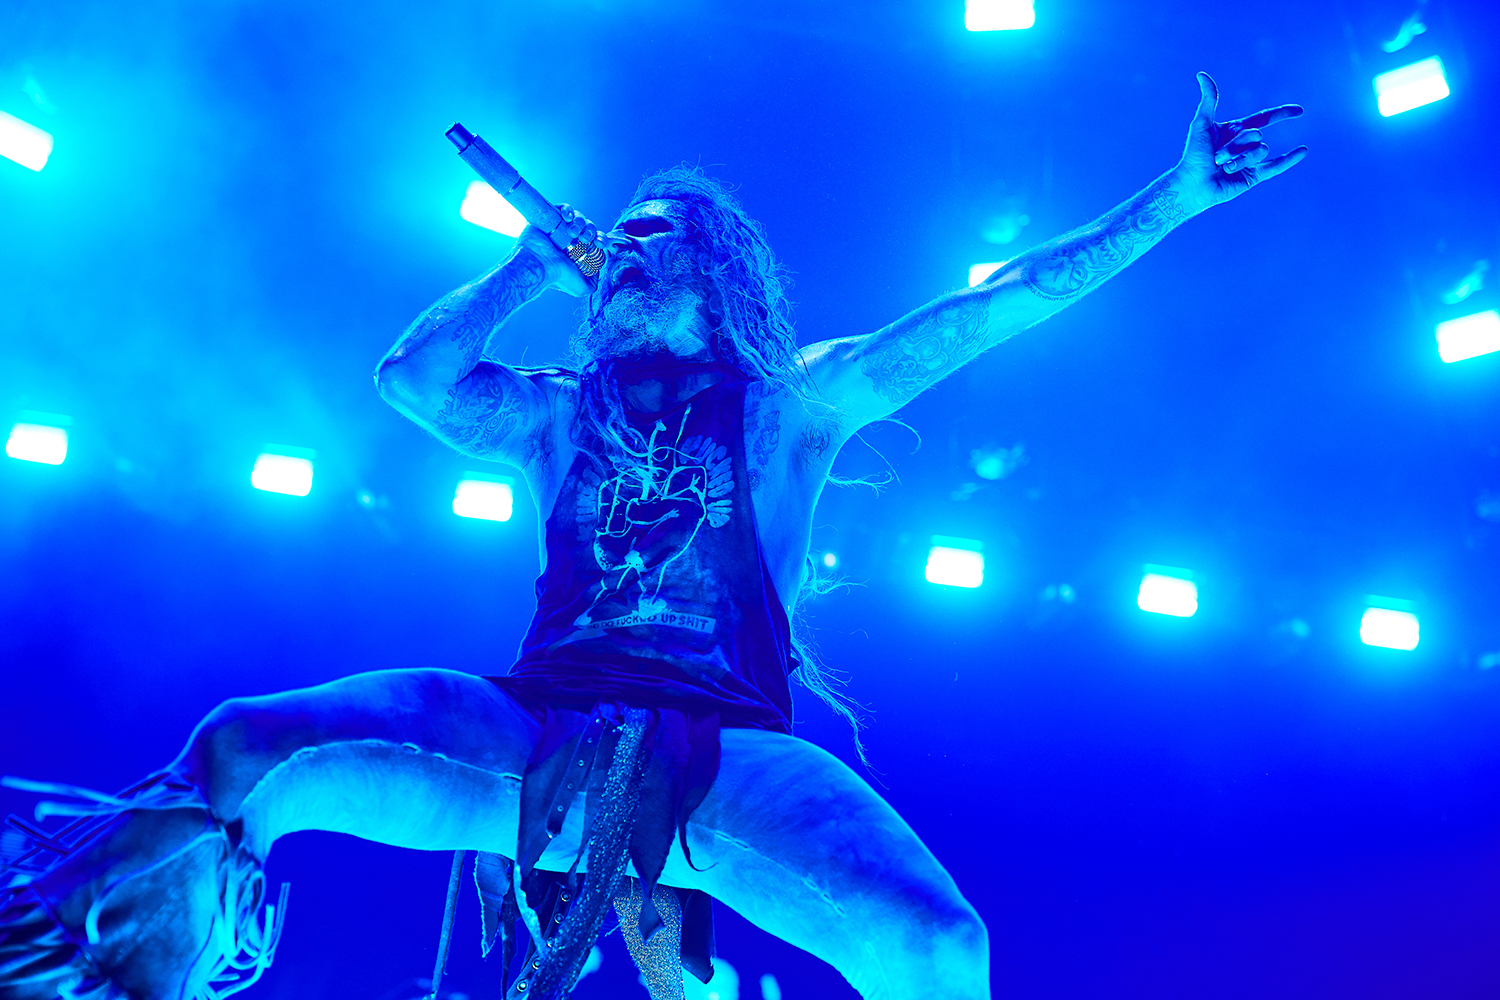  Rob Zombie performs during a concert as part of the Twins of Evil Tour at the US Cellular Center in Cedar Rapids on Saturday, Aug. 10, 2019.  